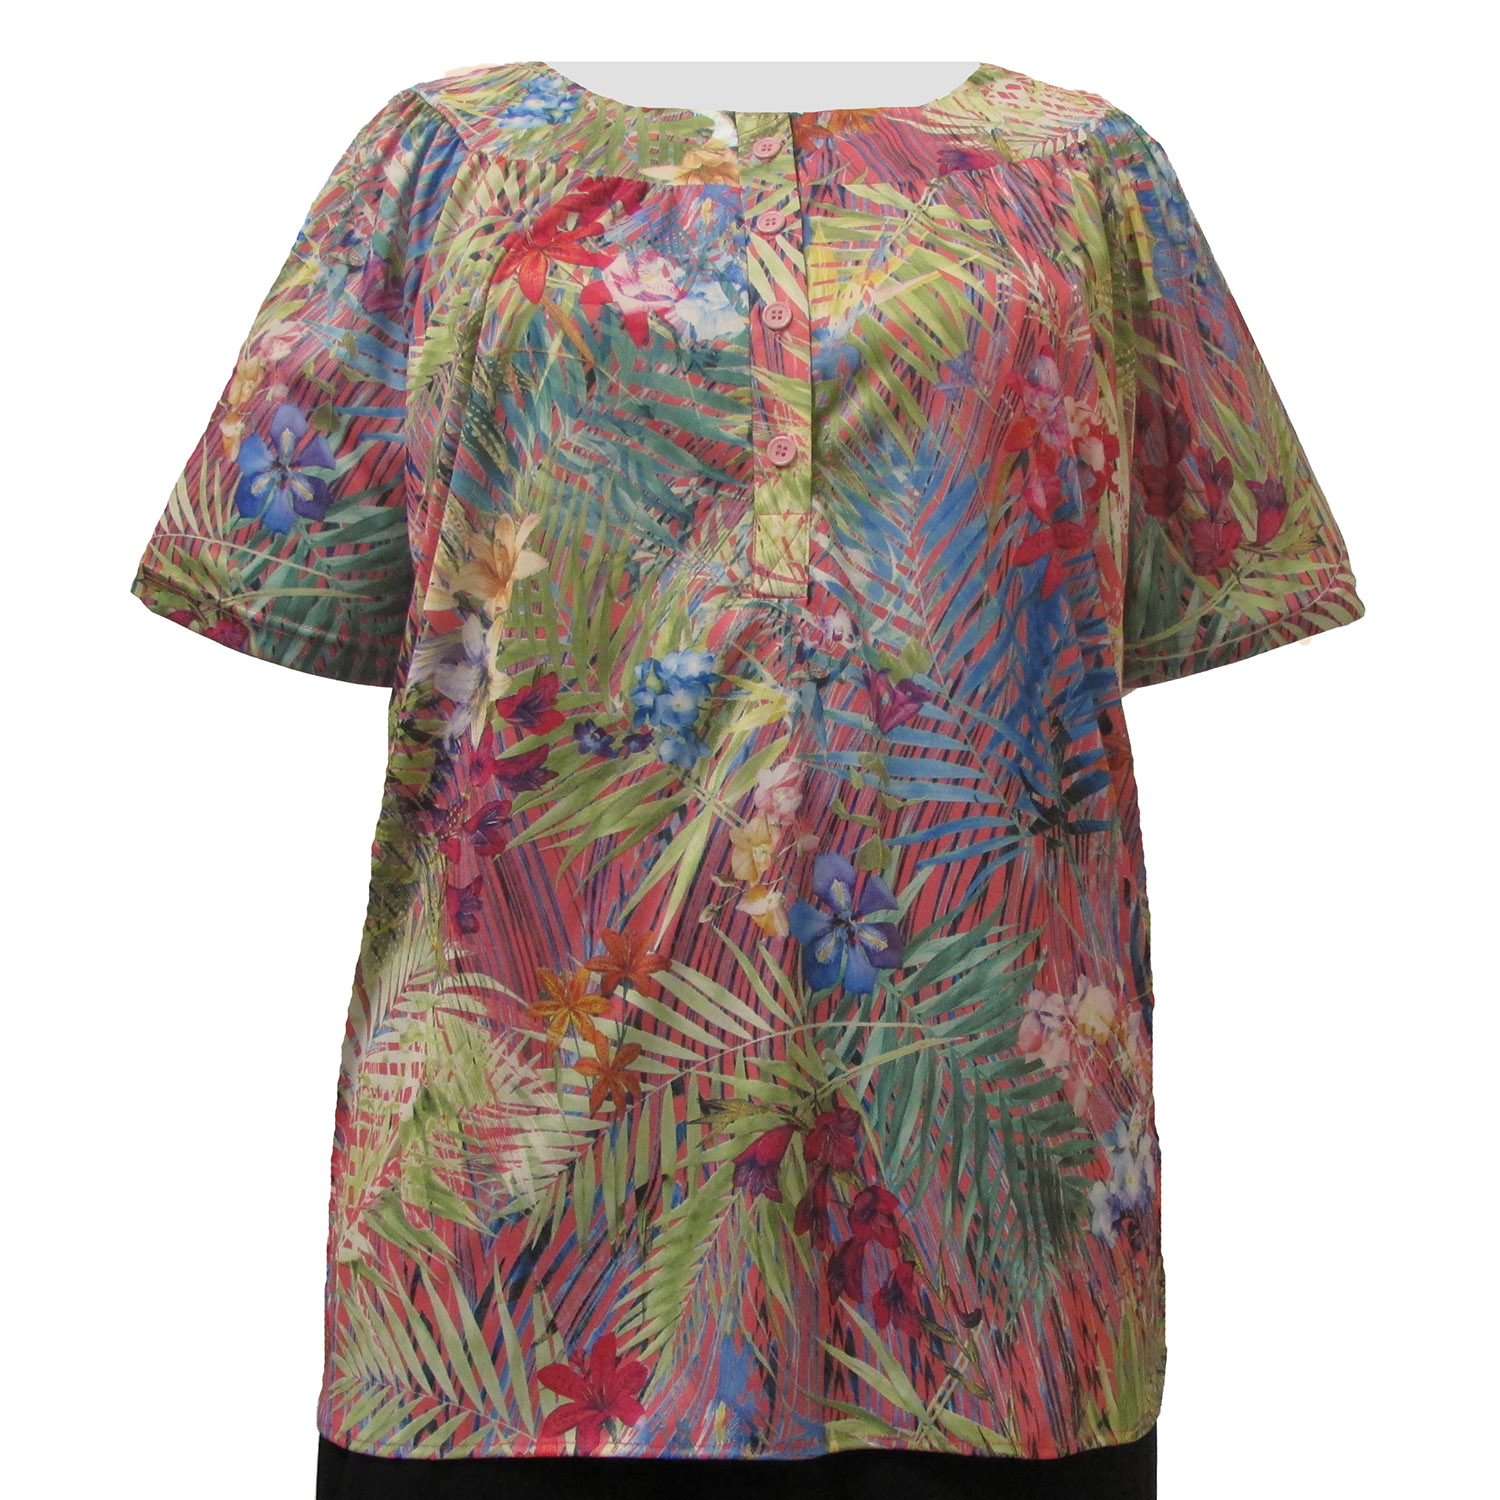 A Personal Touch Tropical Delight Round Neck Pullover Plus Size Woman's Top